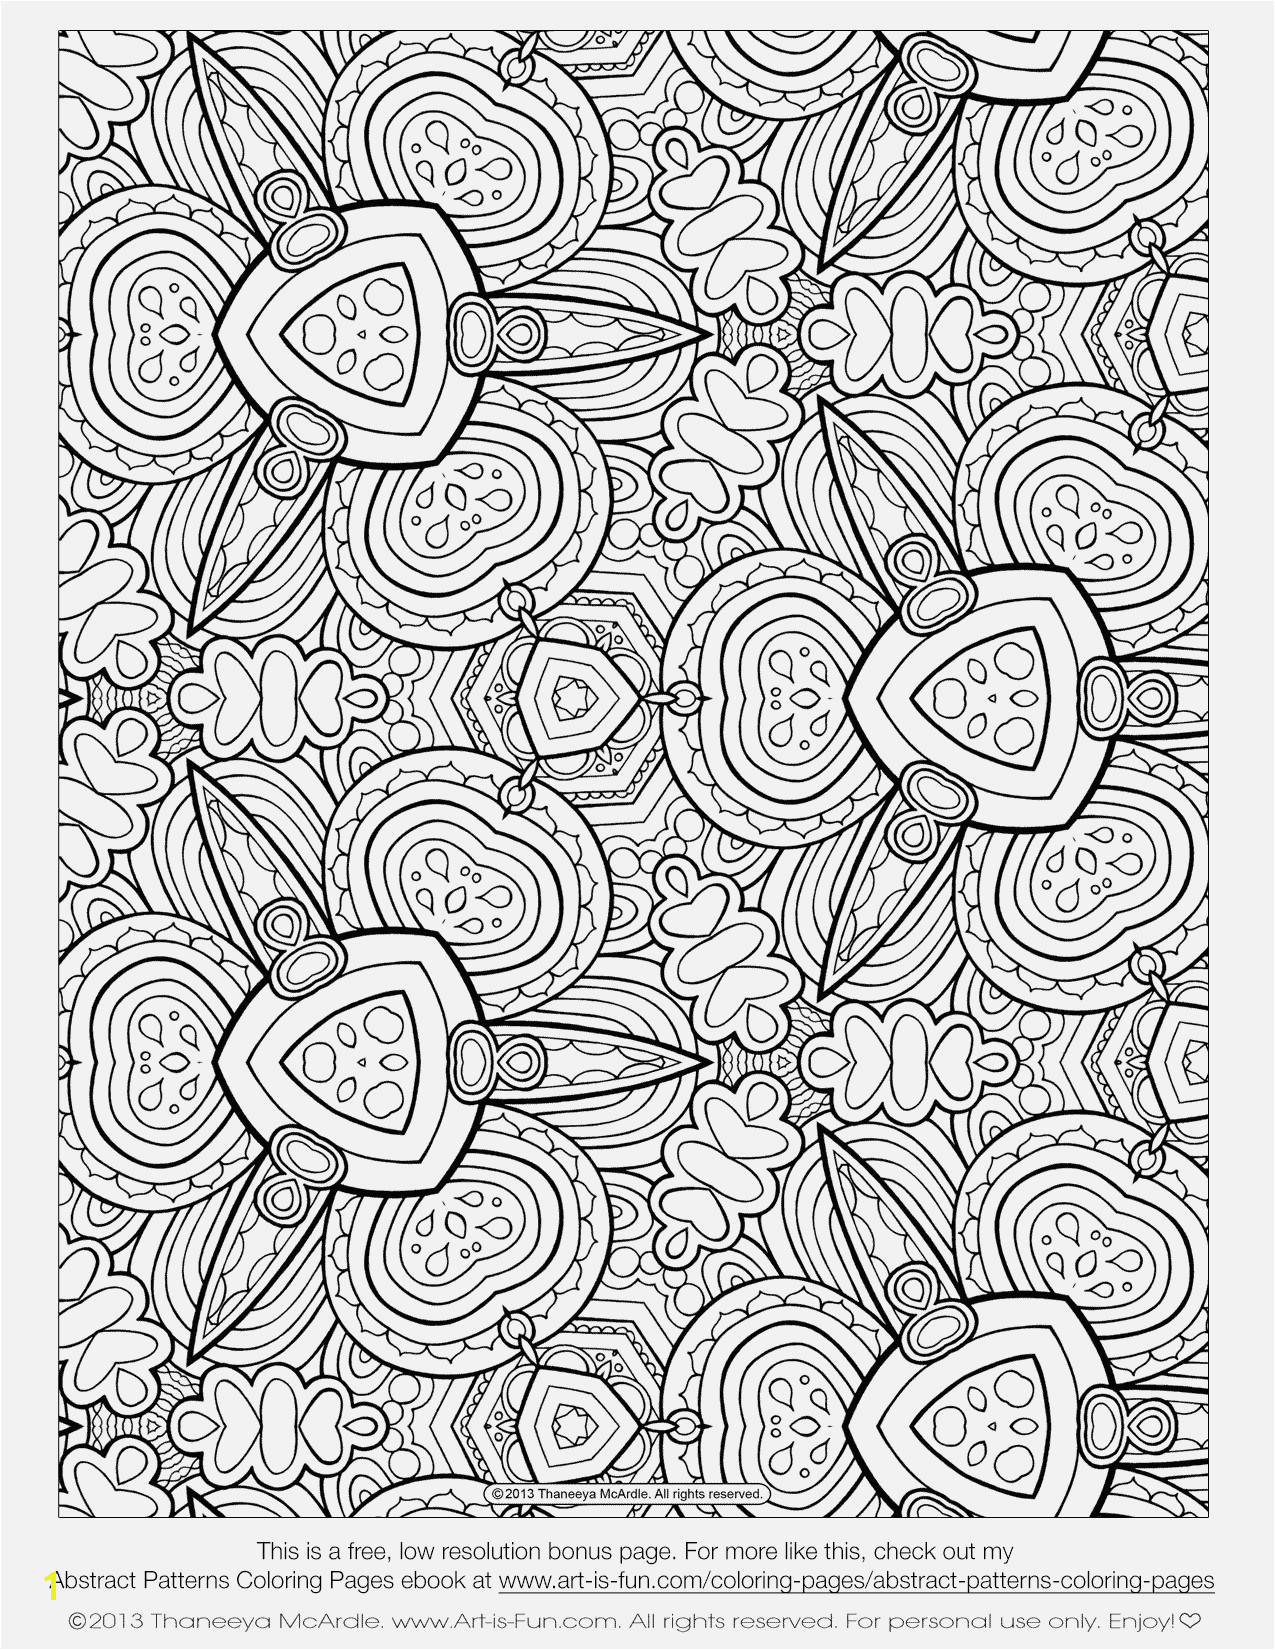 Awesome Coloring Books for Adults Printable Adult Coloring Pages Colored Awesome Book Coloring Pages Best sol